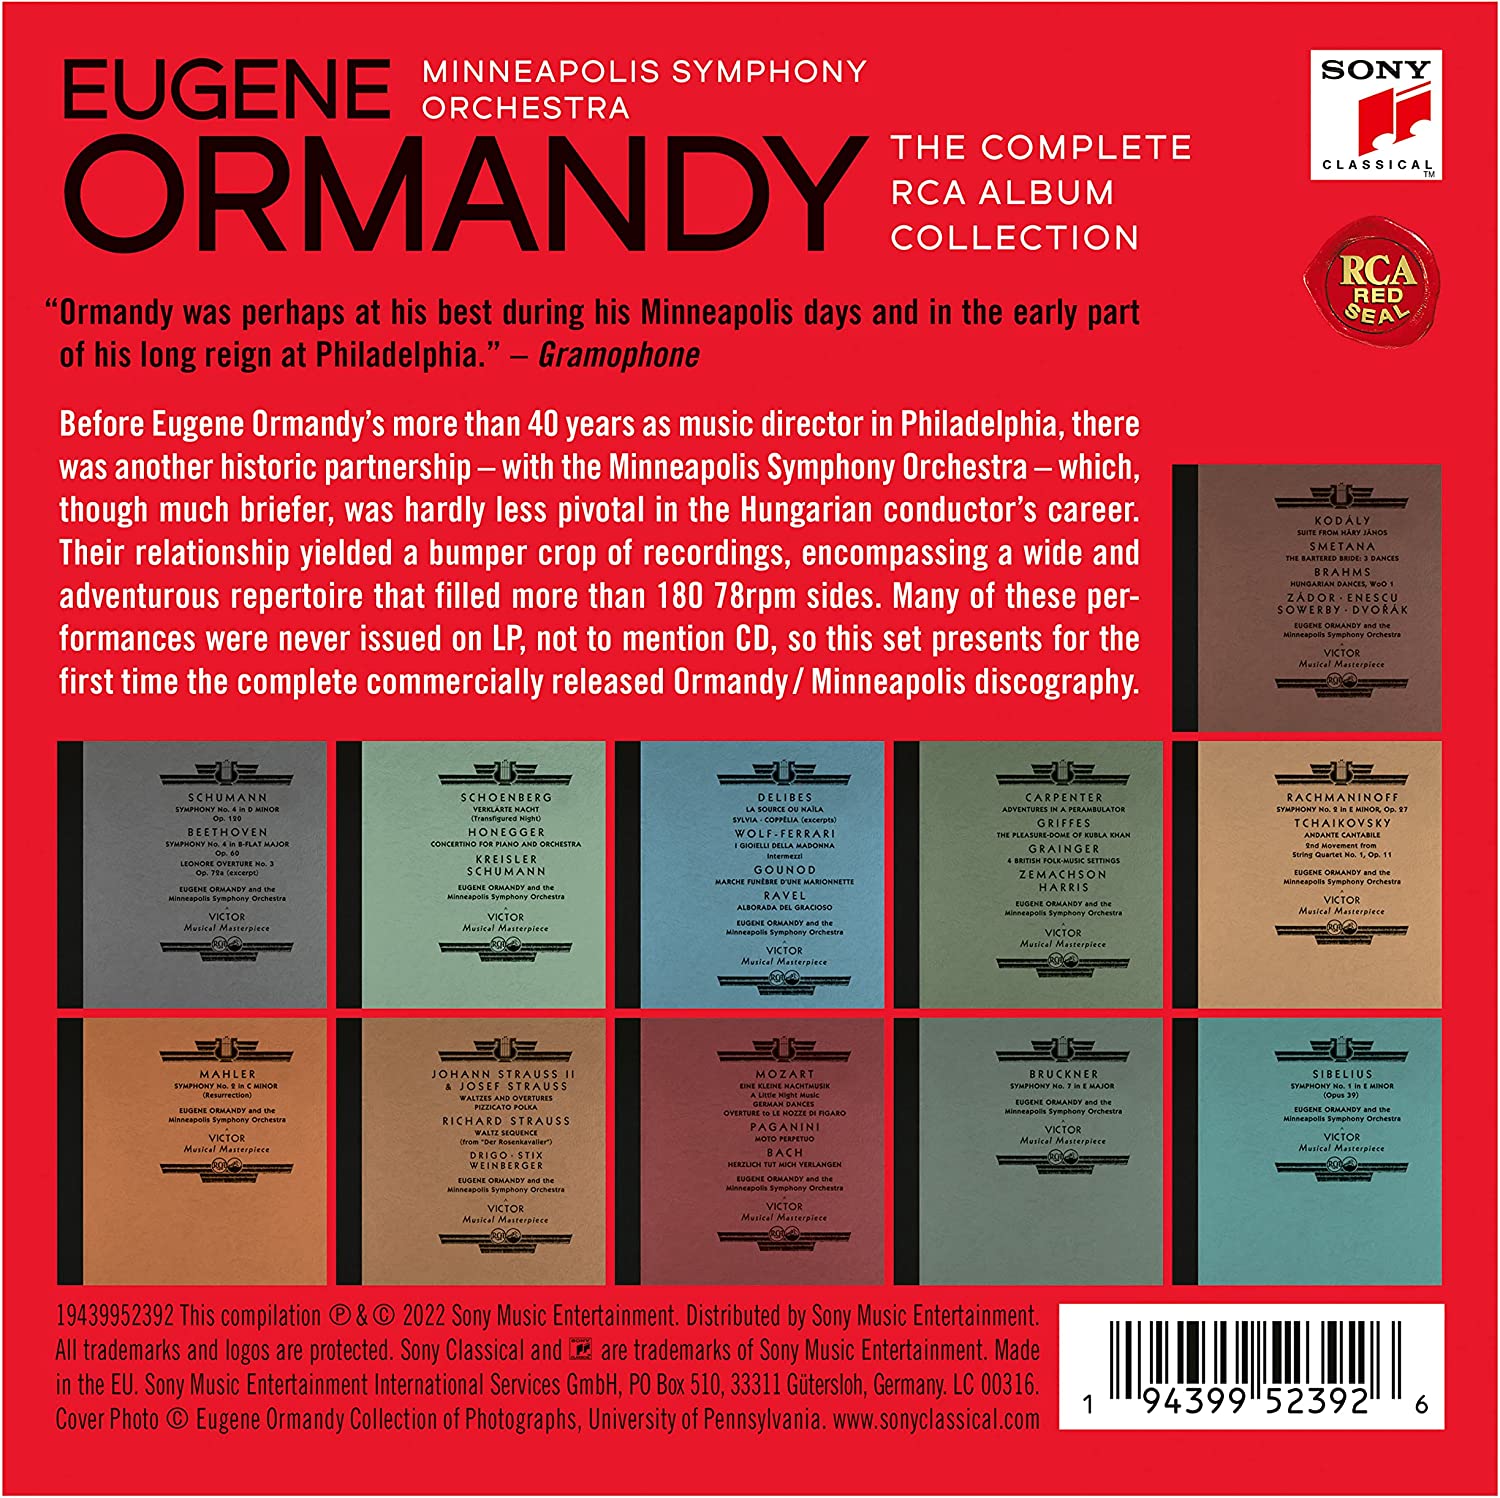 Eugene Ormandy Conducts The Minneapolis Symphony Orchestra - The Complete Rca Album Collection (11CD Box Set) | Eugene Ormandy, Minneapolis Symphony Orchestra